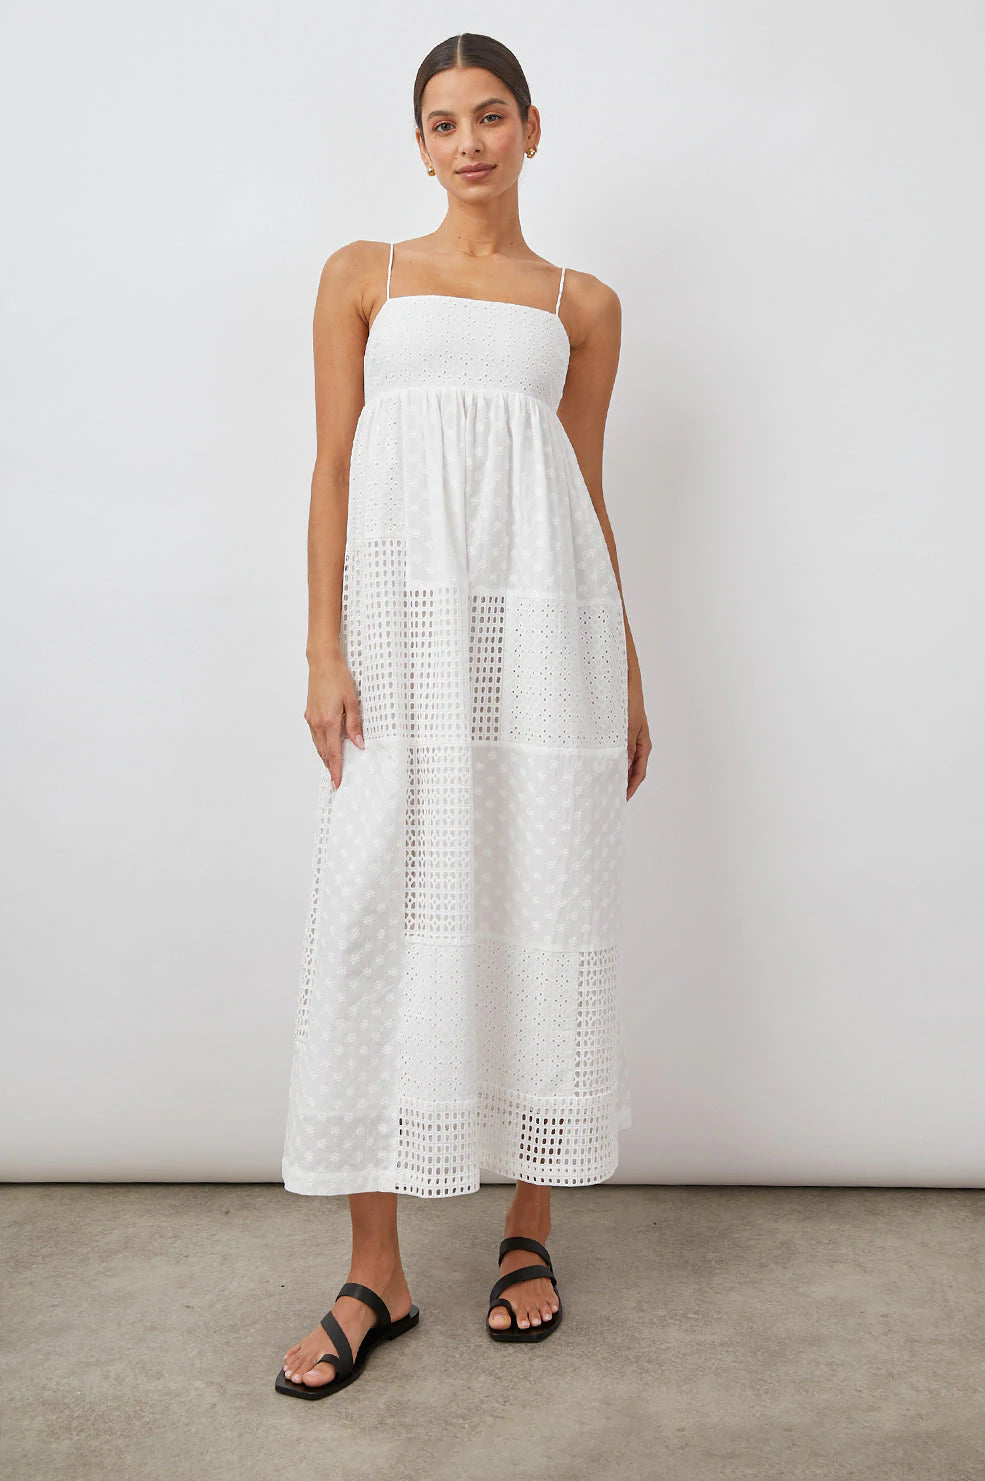 White cotton dress with spaghetti straps in patchwork fabric